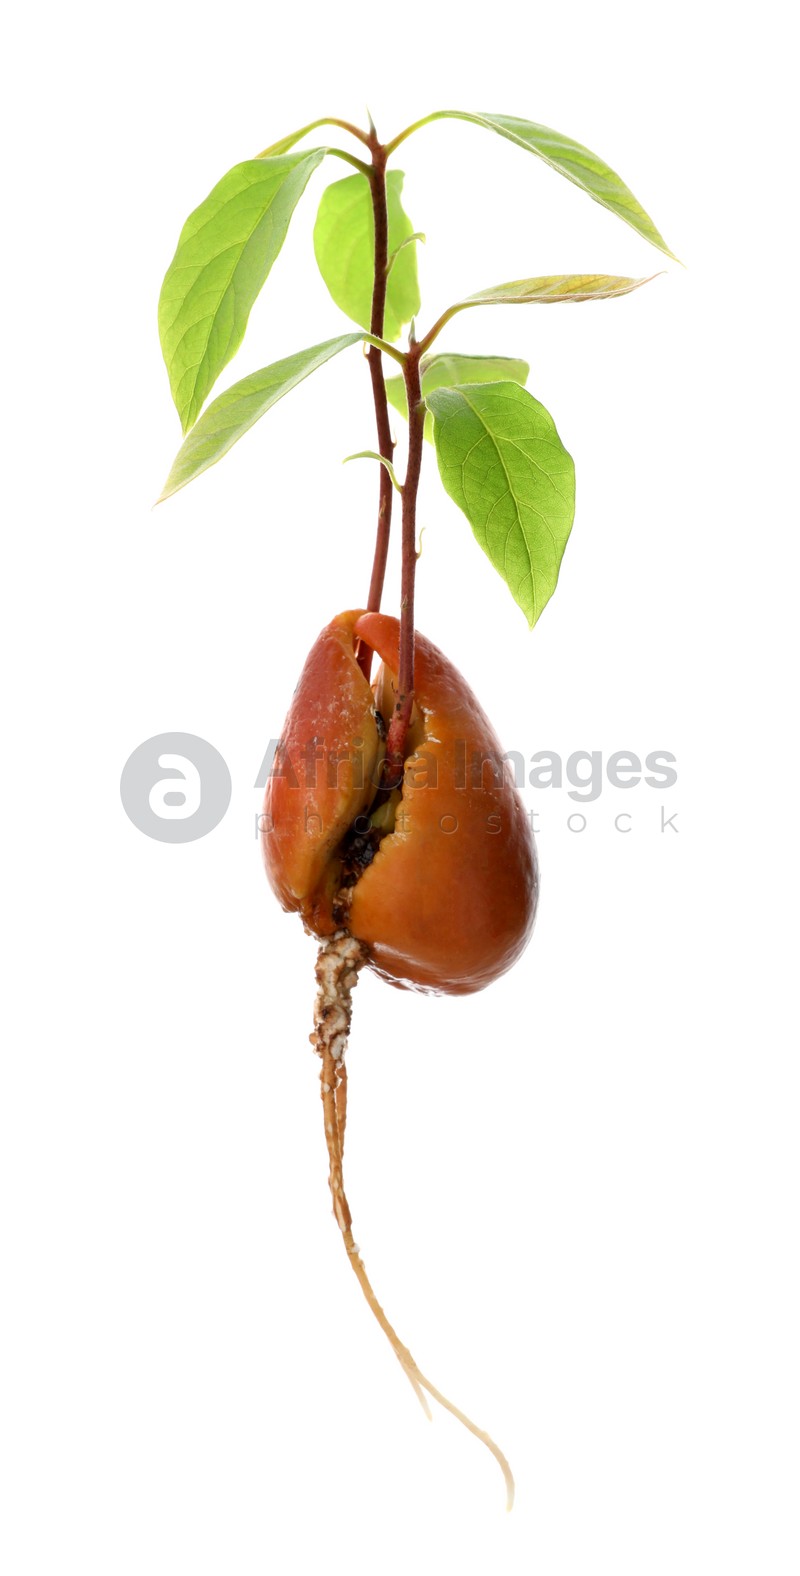 Avocado seed with sprouts and root on white background